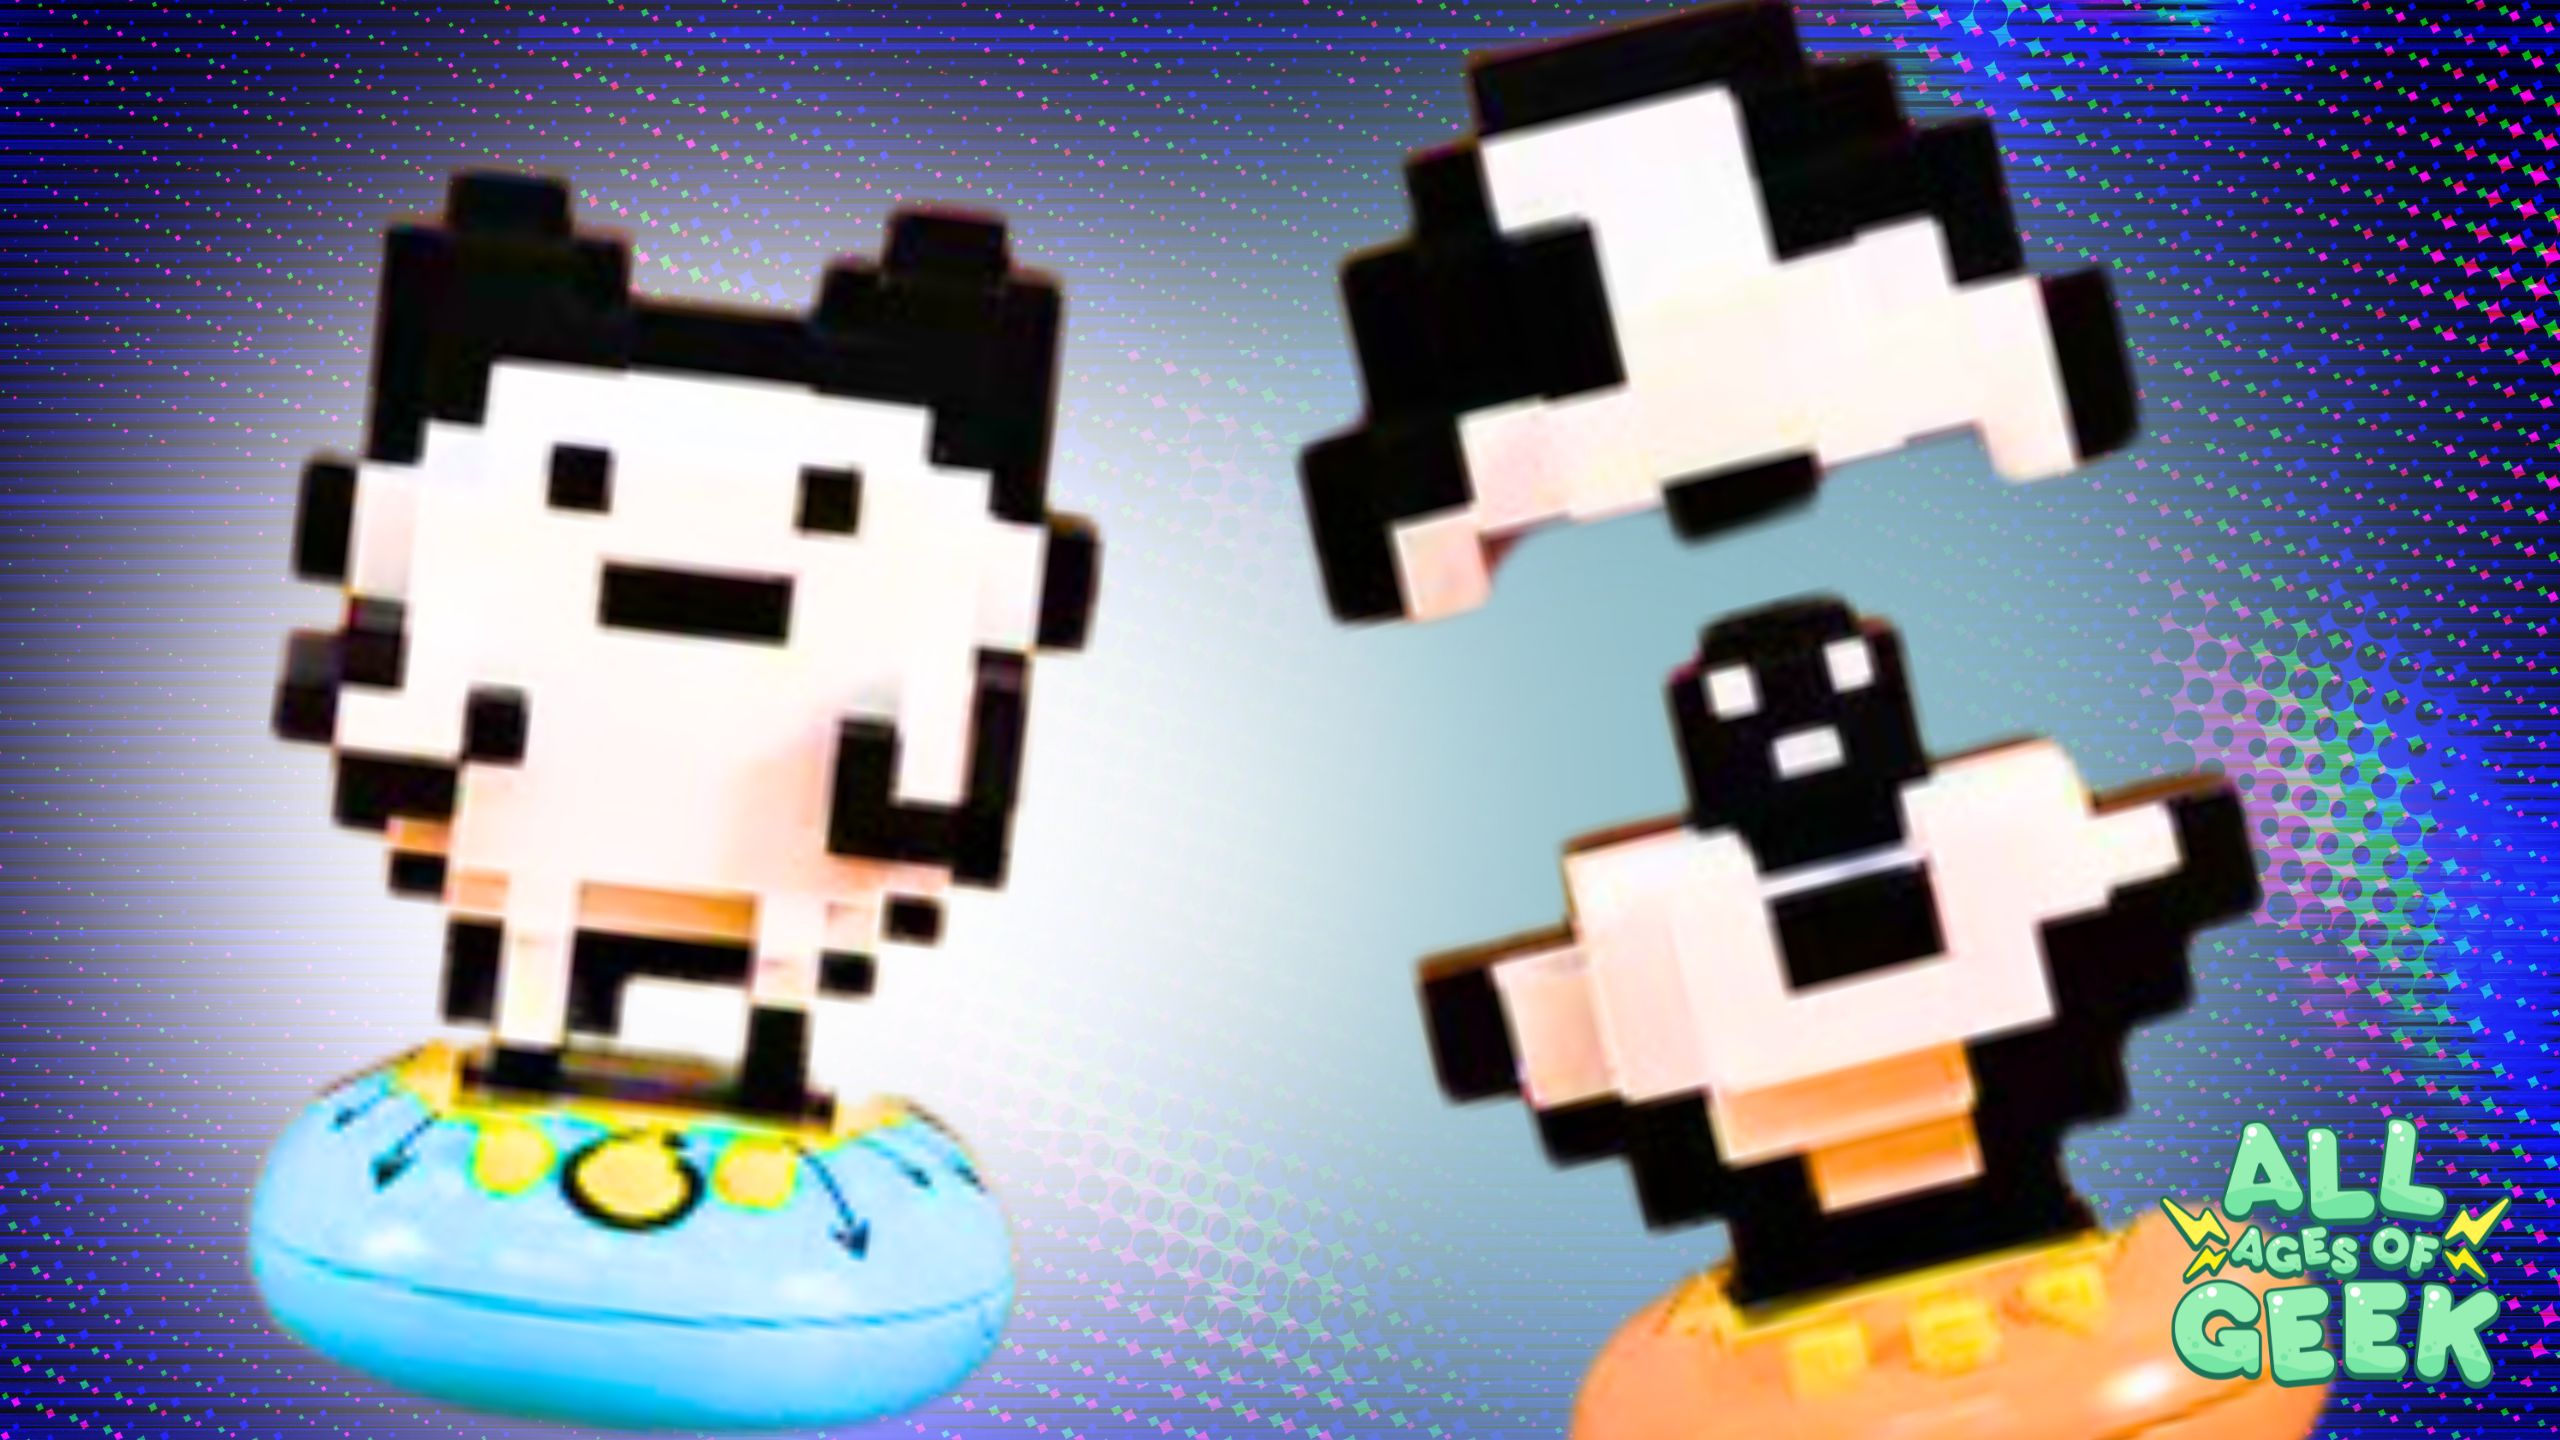 Pixelated Tamagotchi figures from the PoppeDot Collection vol.1 on colorful pedestals, featuring two characters: one with black ears and a blue pedestal, and the other with an open shell revealing a smaller black and white character inside on an orange pedestal. The All Ages of Geek logo is visible in the bottom right corner.